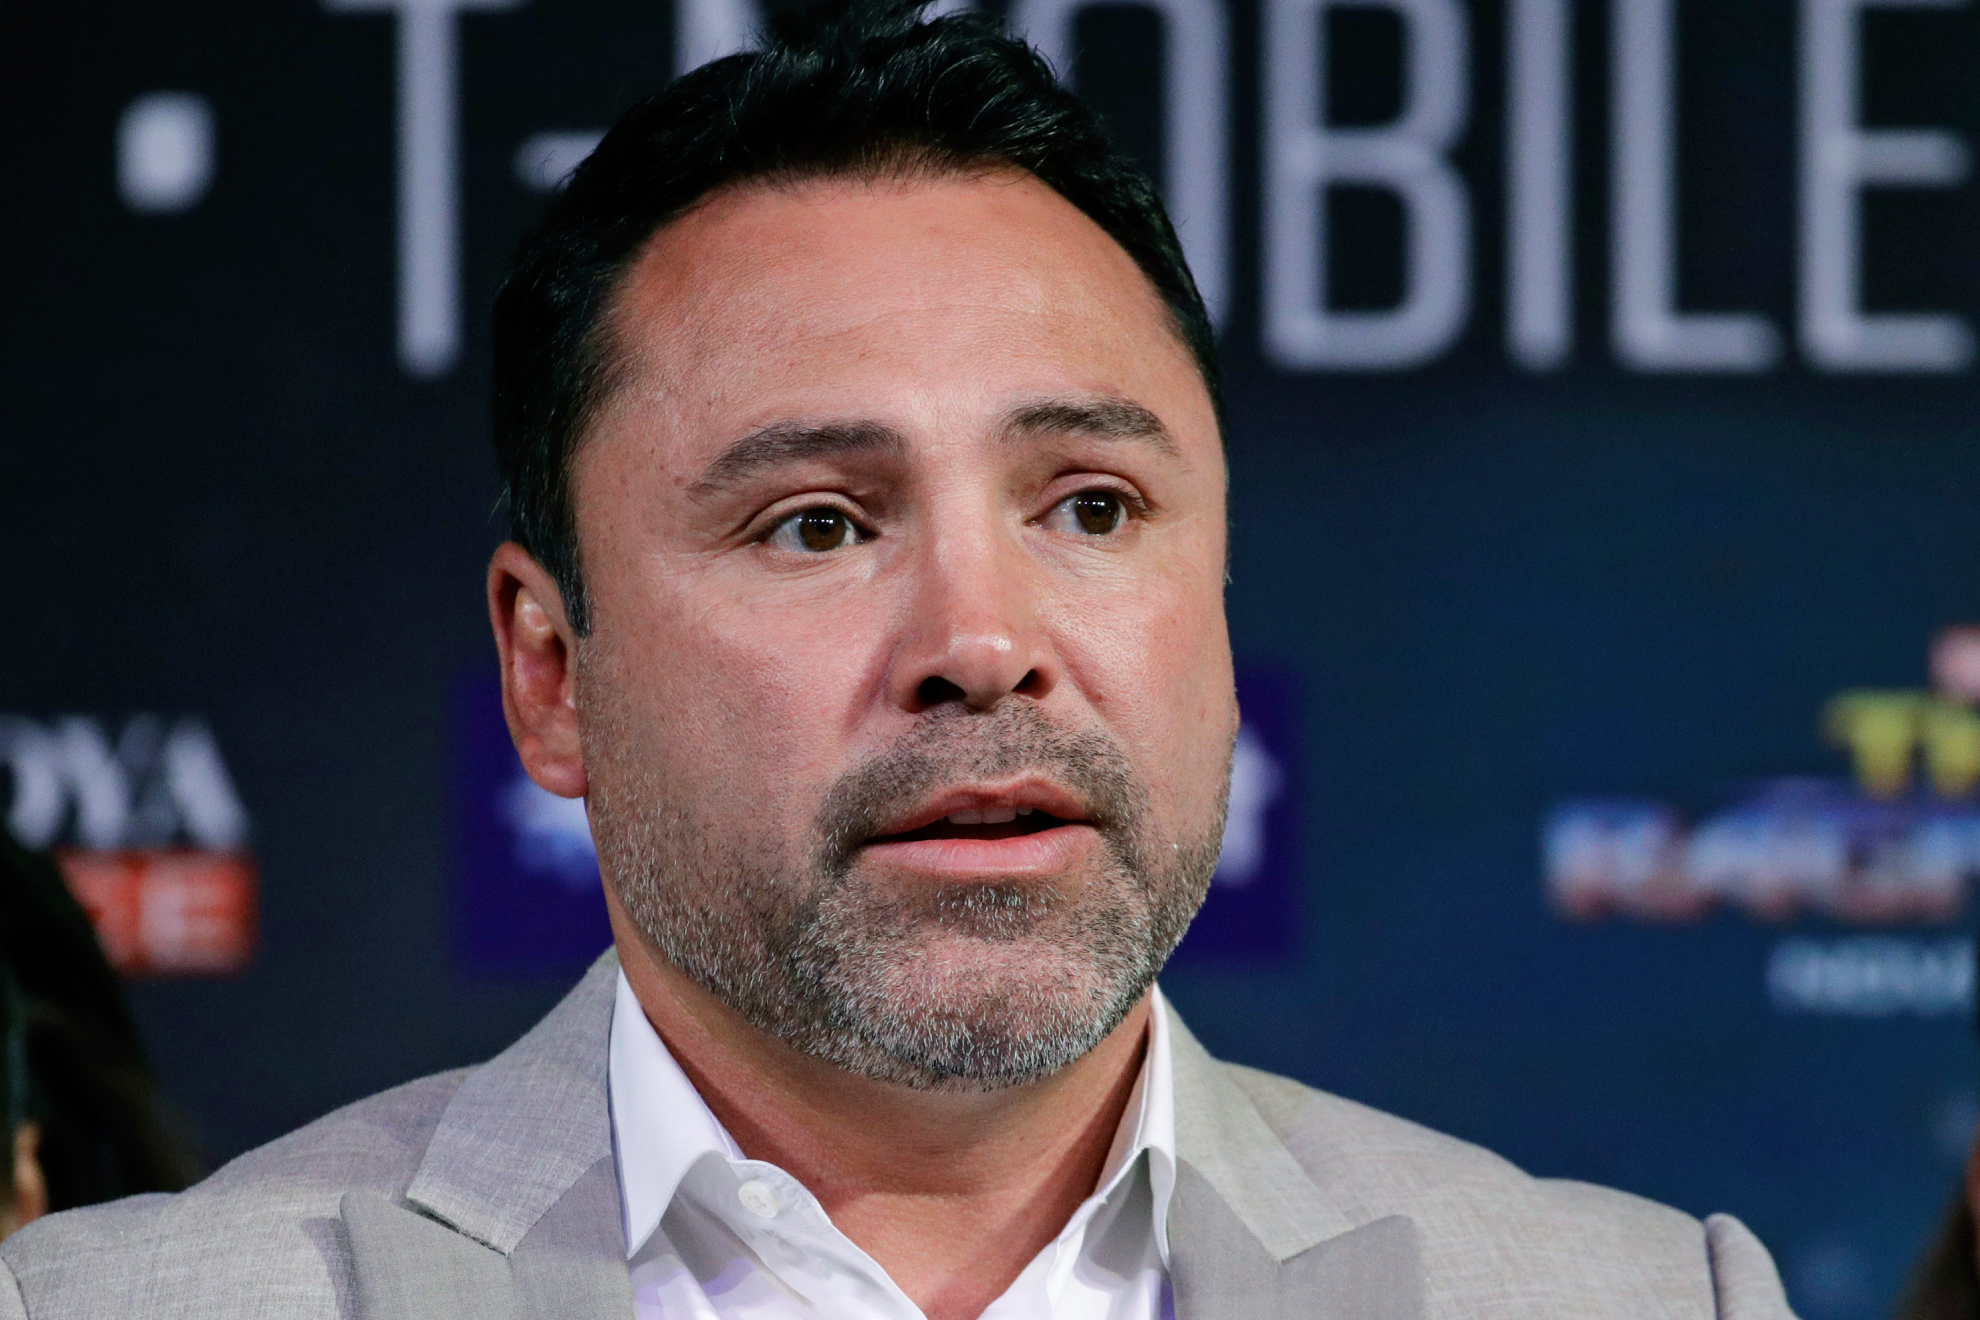 Oscar de la Hoya caught playing golf in his underwear in bizarre tribute to Patrick Mahomes and the Chiefs